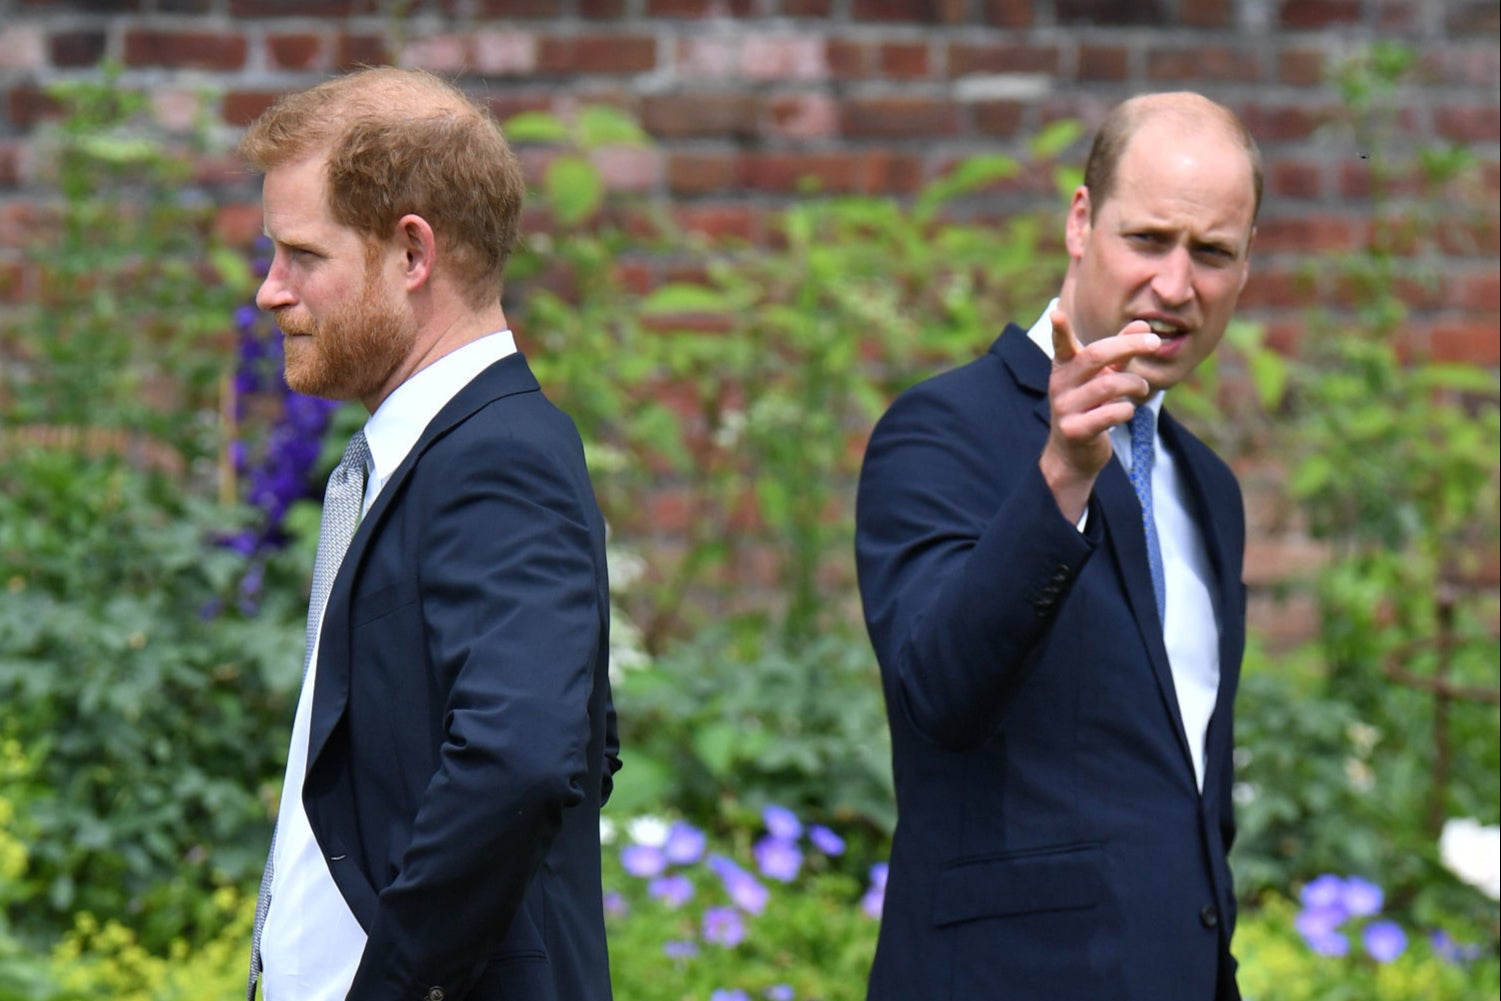 Tensions: Relations between Princes Harry and William have been fraught for years